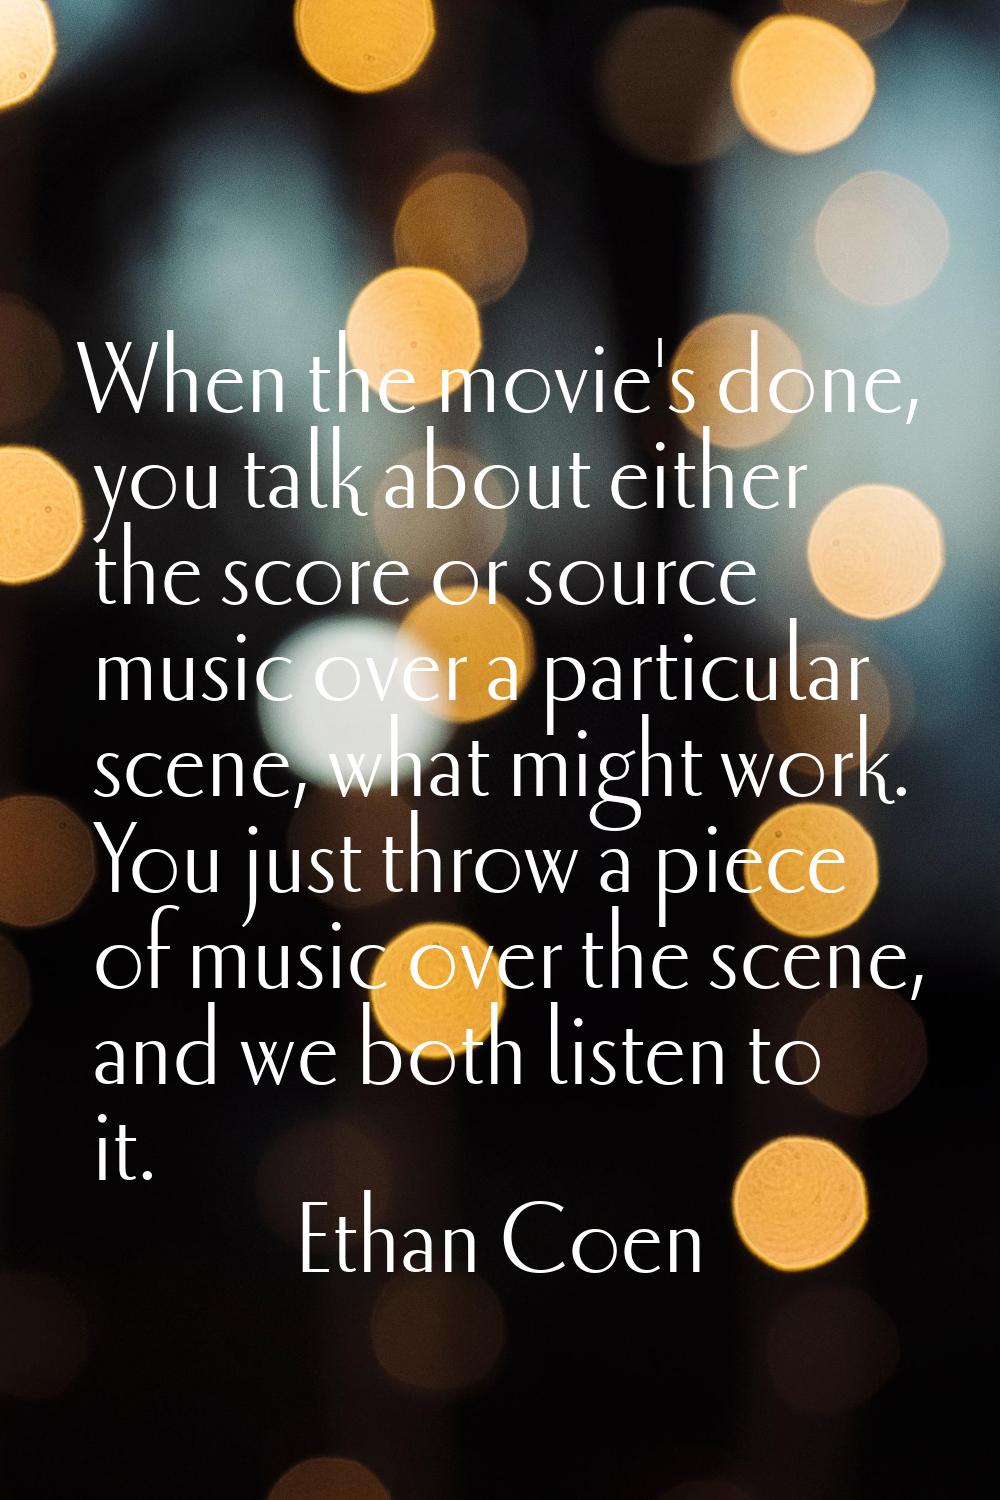 When the movie's done, you talk about either the score or source music over a particular scene, wha